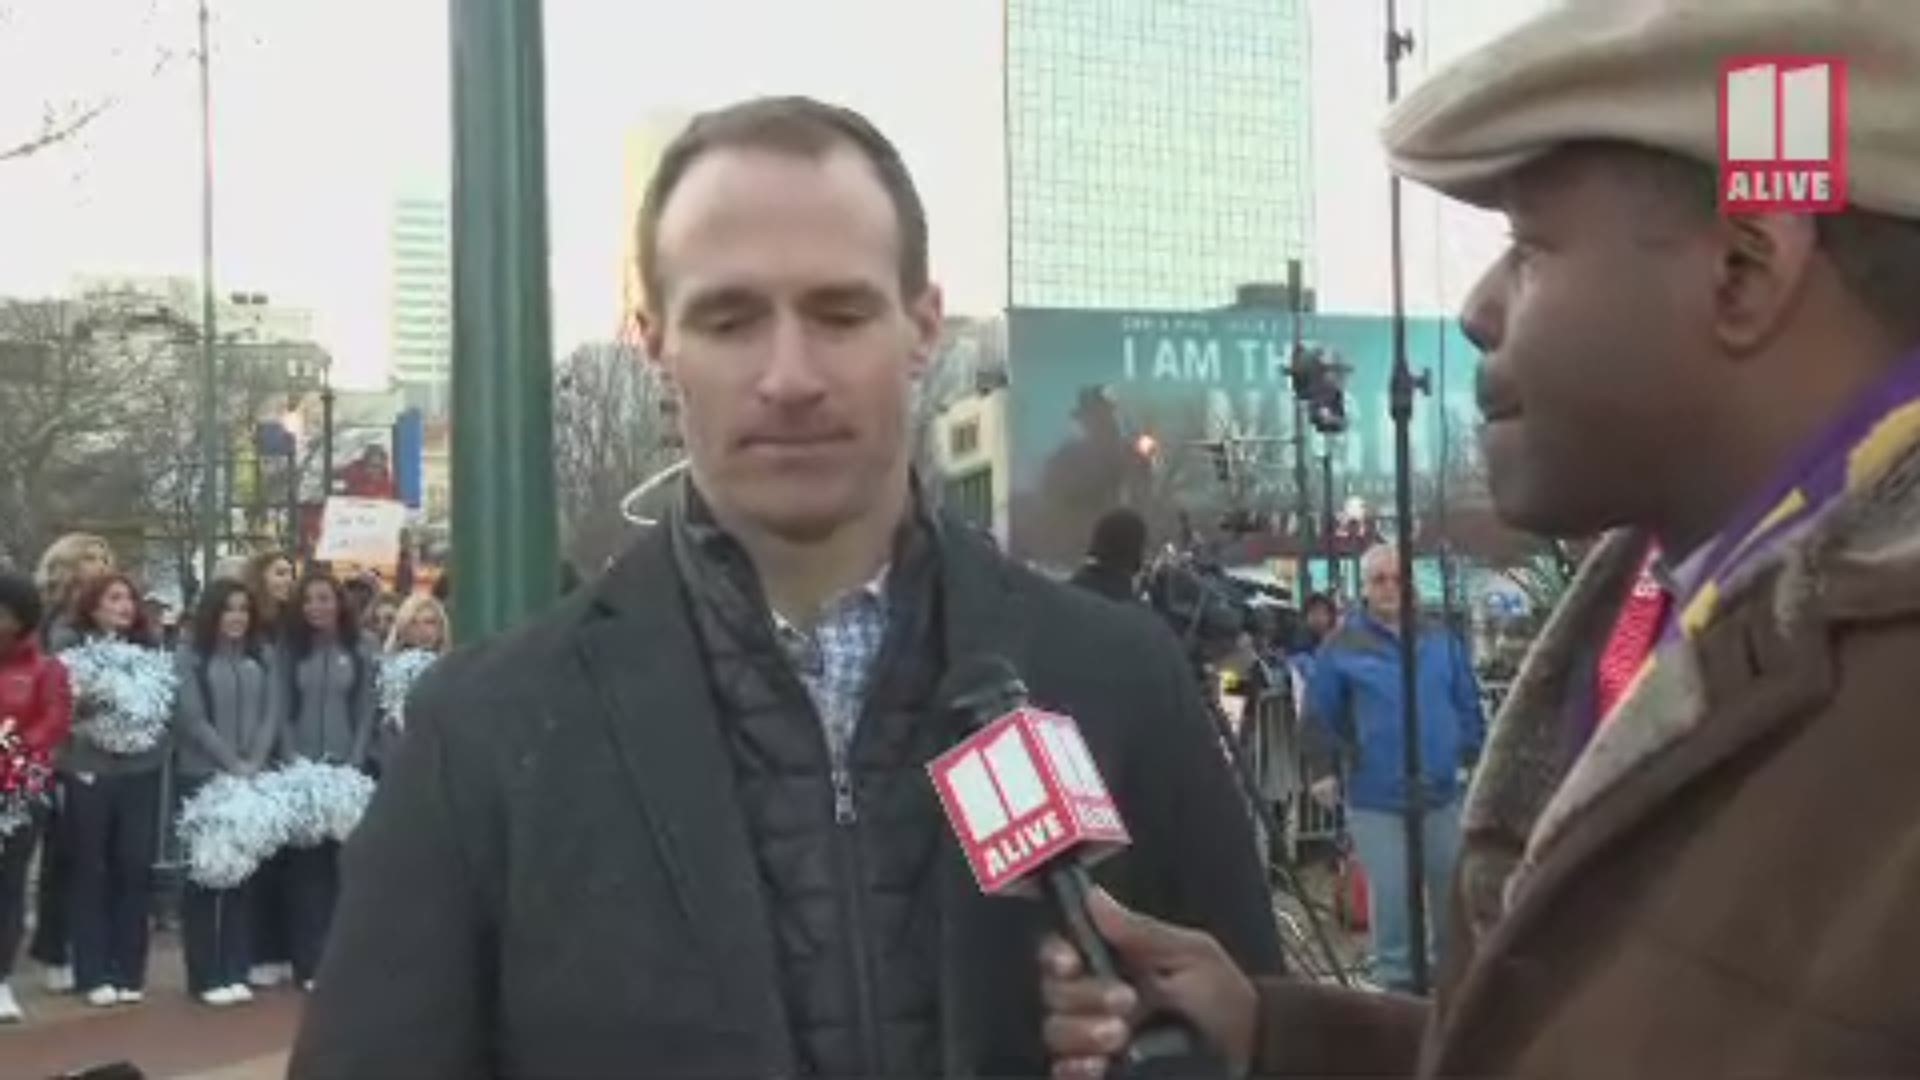 Saints quarter back Drew Brees was spotted in Atlanta for the Super Bowl. Chesley McNeil caught up with and asked him how he feels not playing in it.